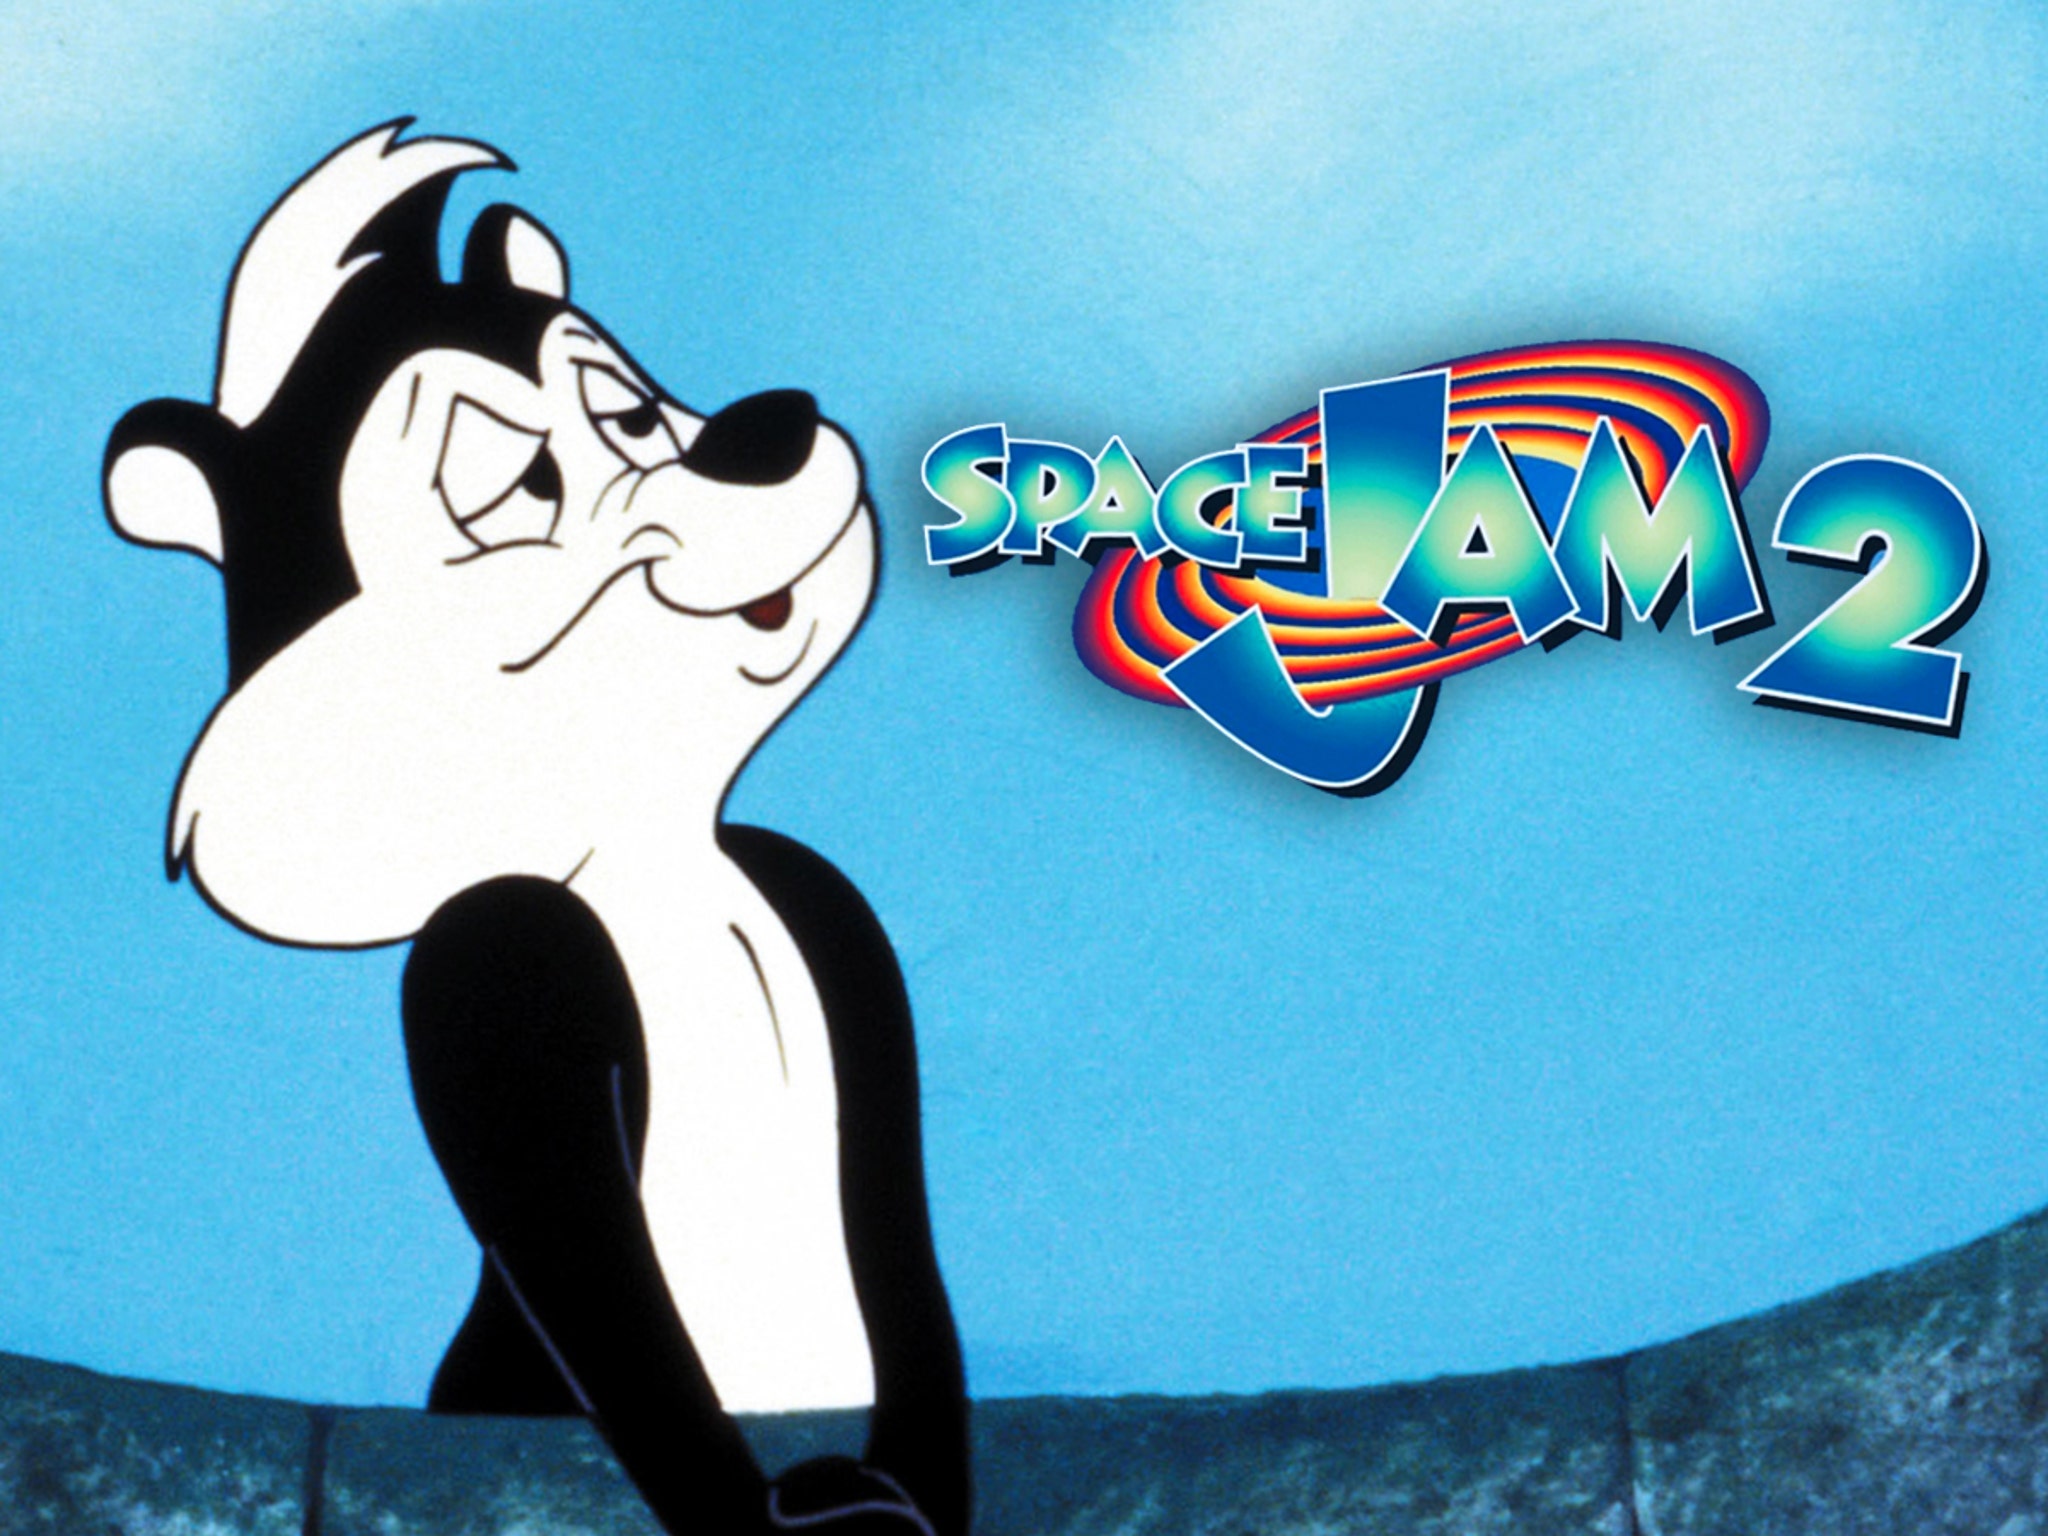 Pepe Le Pew was removed from Space Jam 2 - Legacy!   - The  Independent Video Game Community